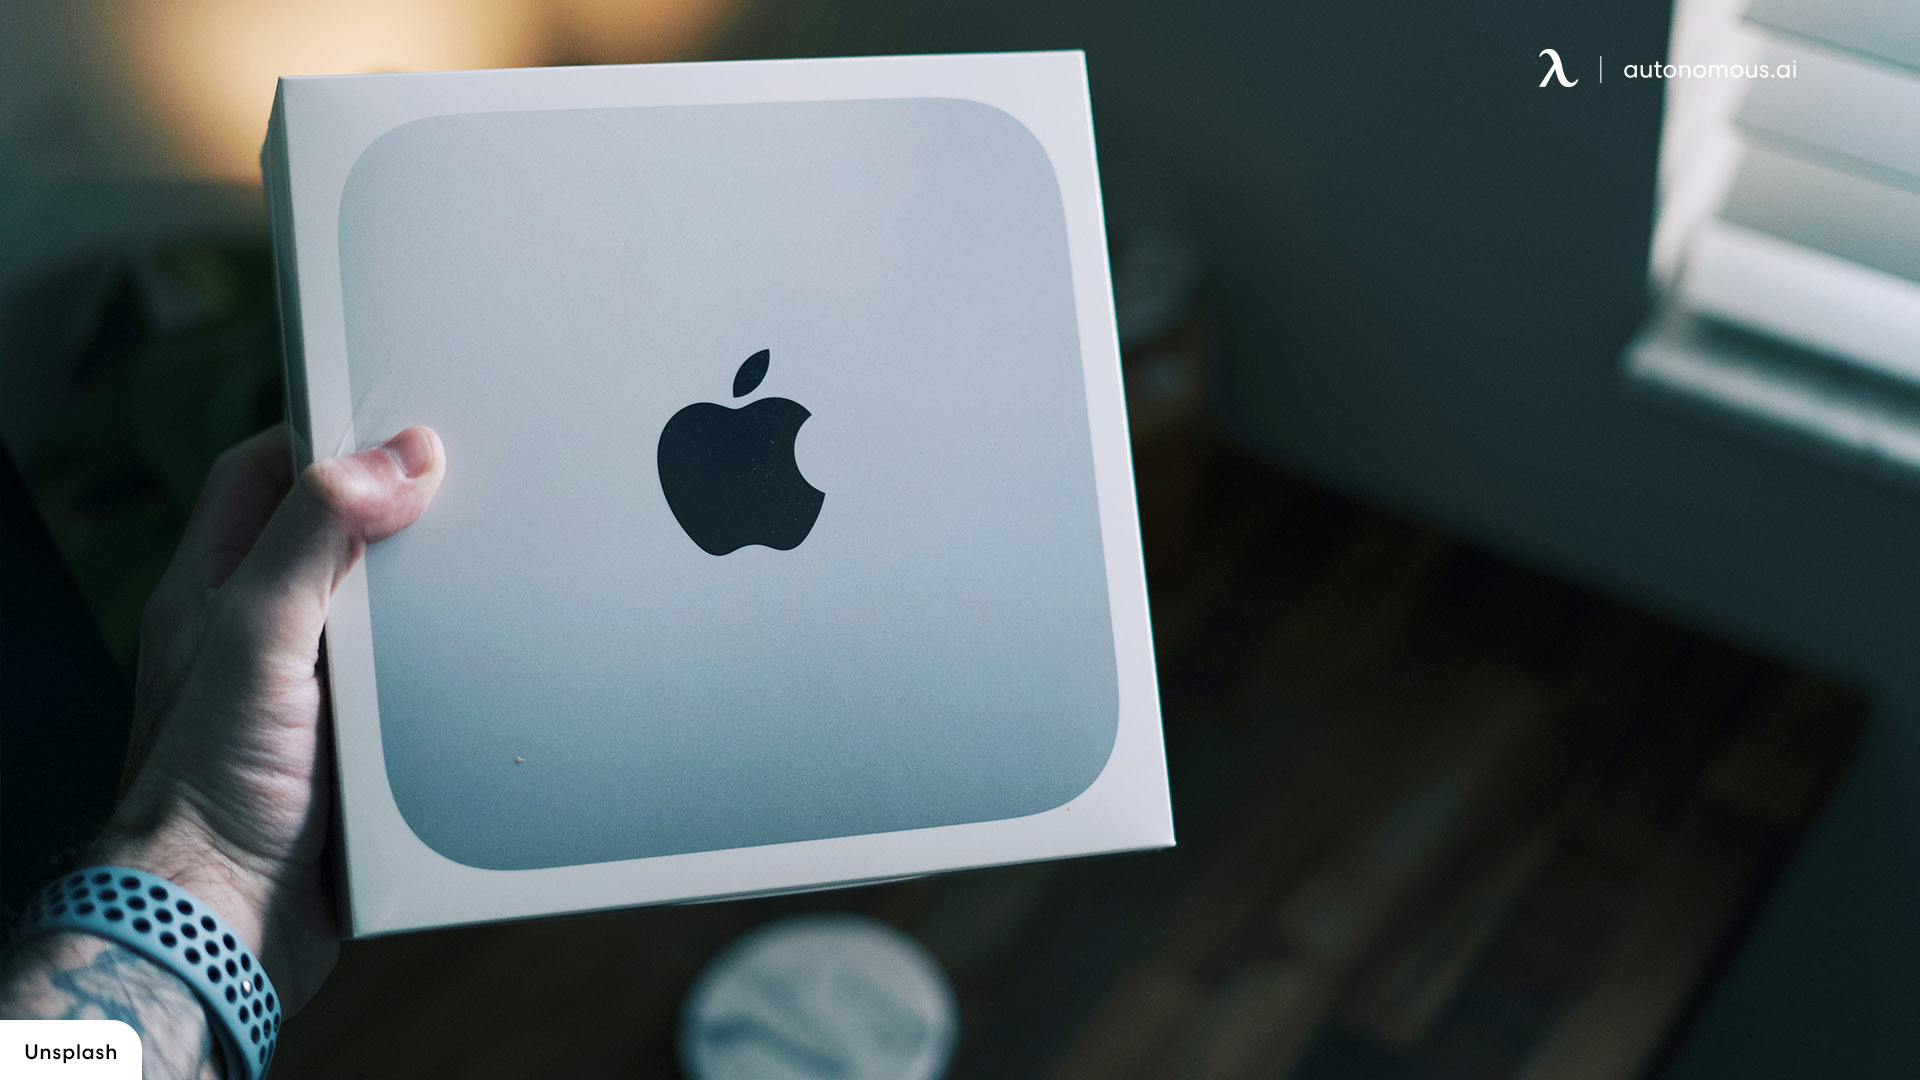 Key Differences Between Mac Mini M2 and Earlier Models